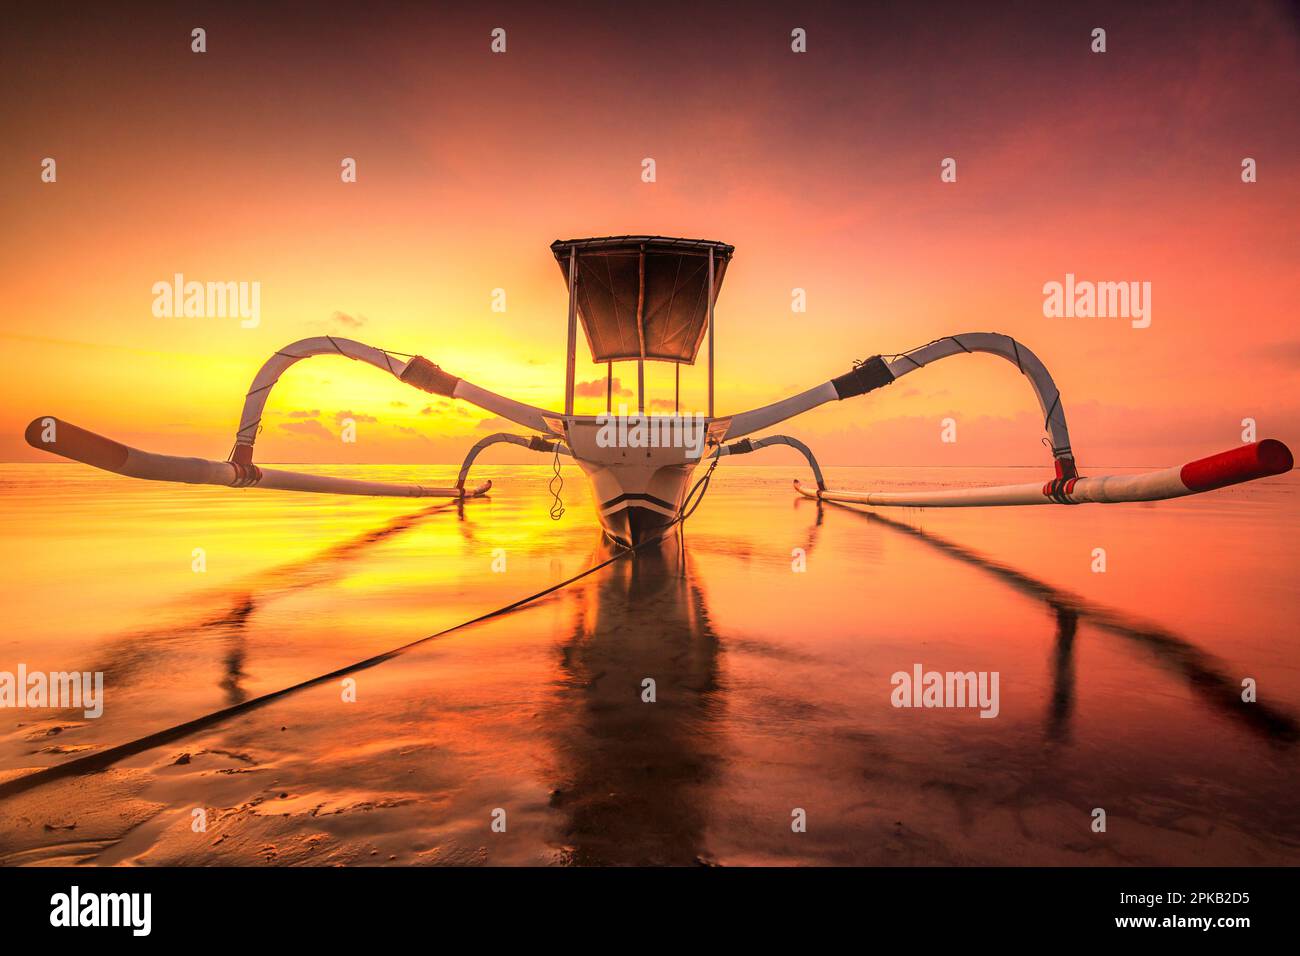 Traditional fishing boat Jukung in dreamlike sunset over the beach and sea of Sanur, Denpasar, Bali, Indonesia Stock Photo